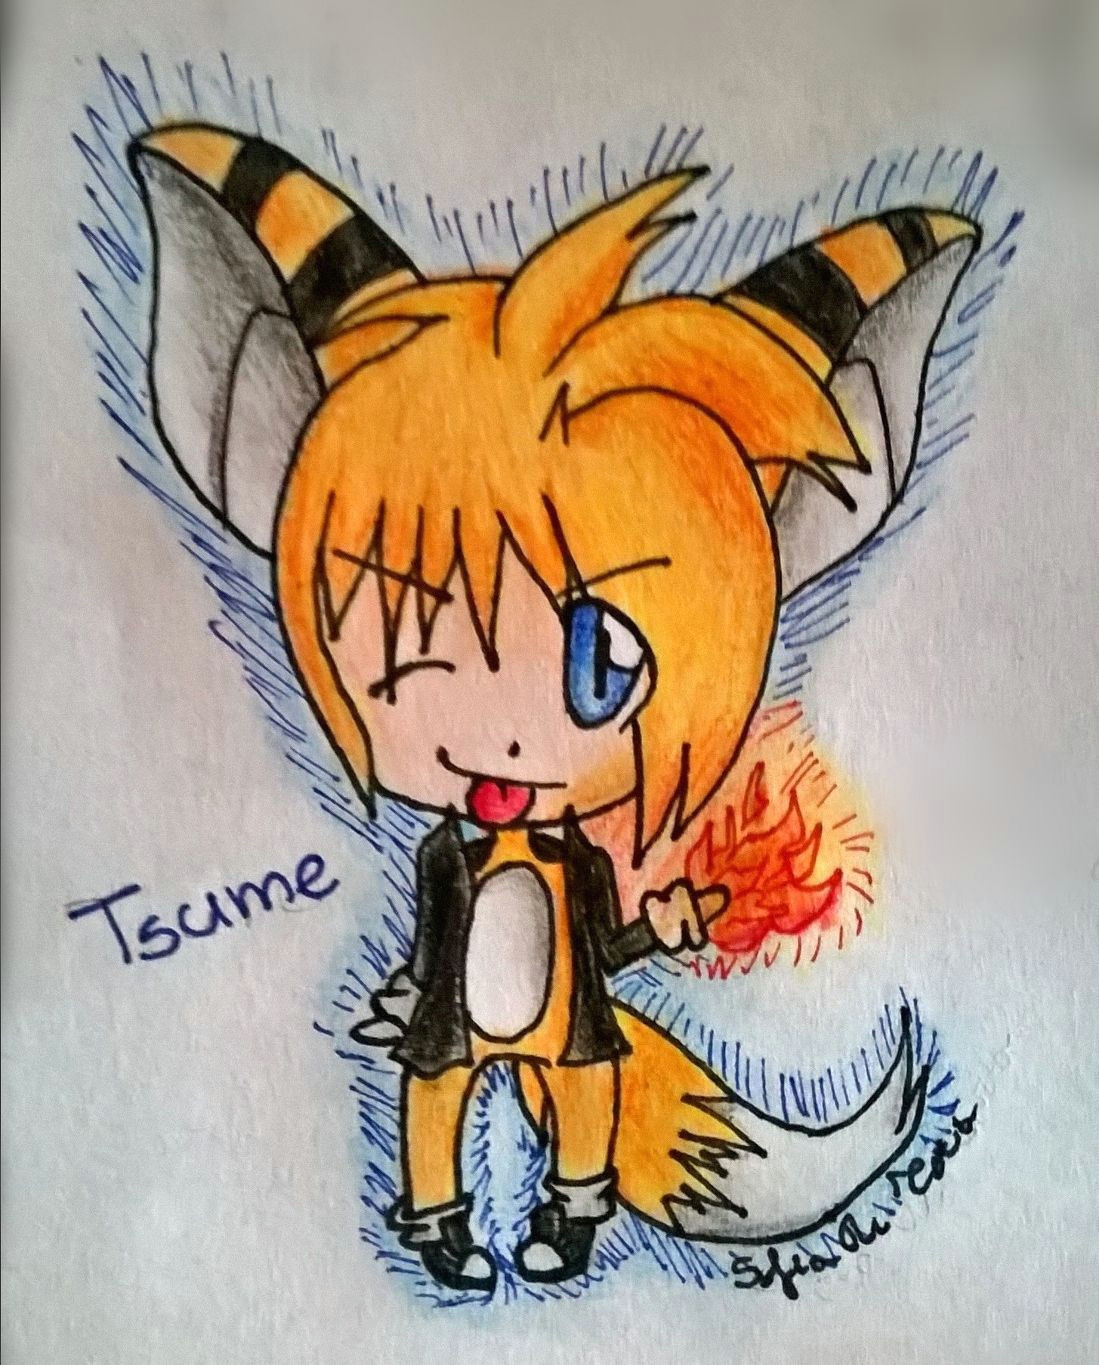 request on facebook by daniel trindade tsume the fox in little little chibi style w art by zumiya73 tsume belongs to daniel trindade on facebook